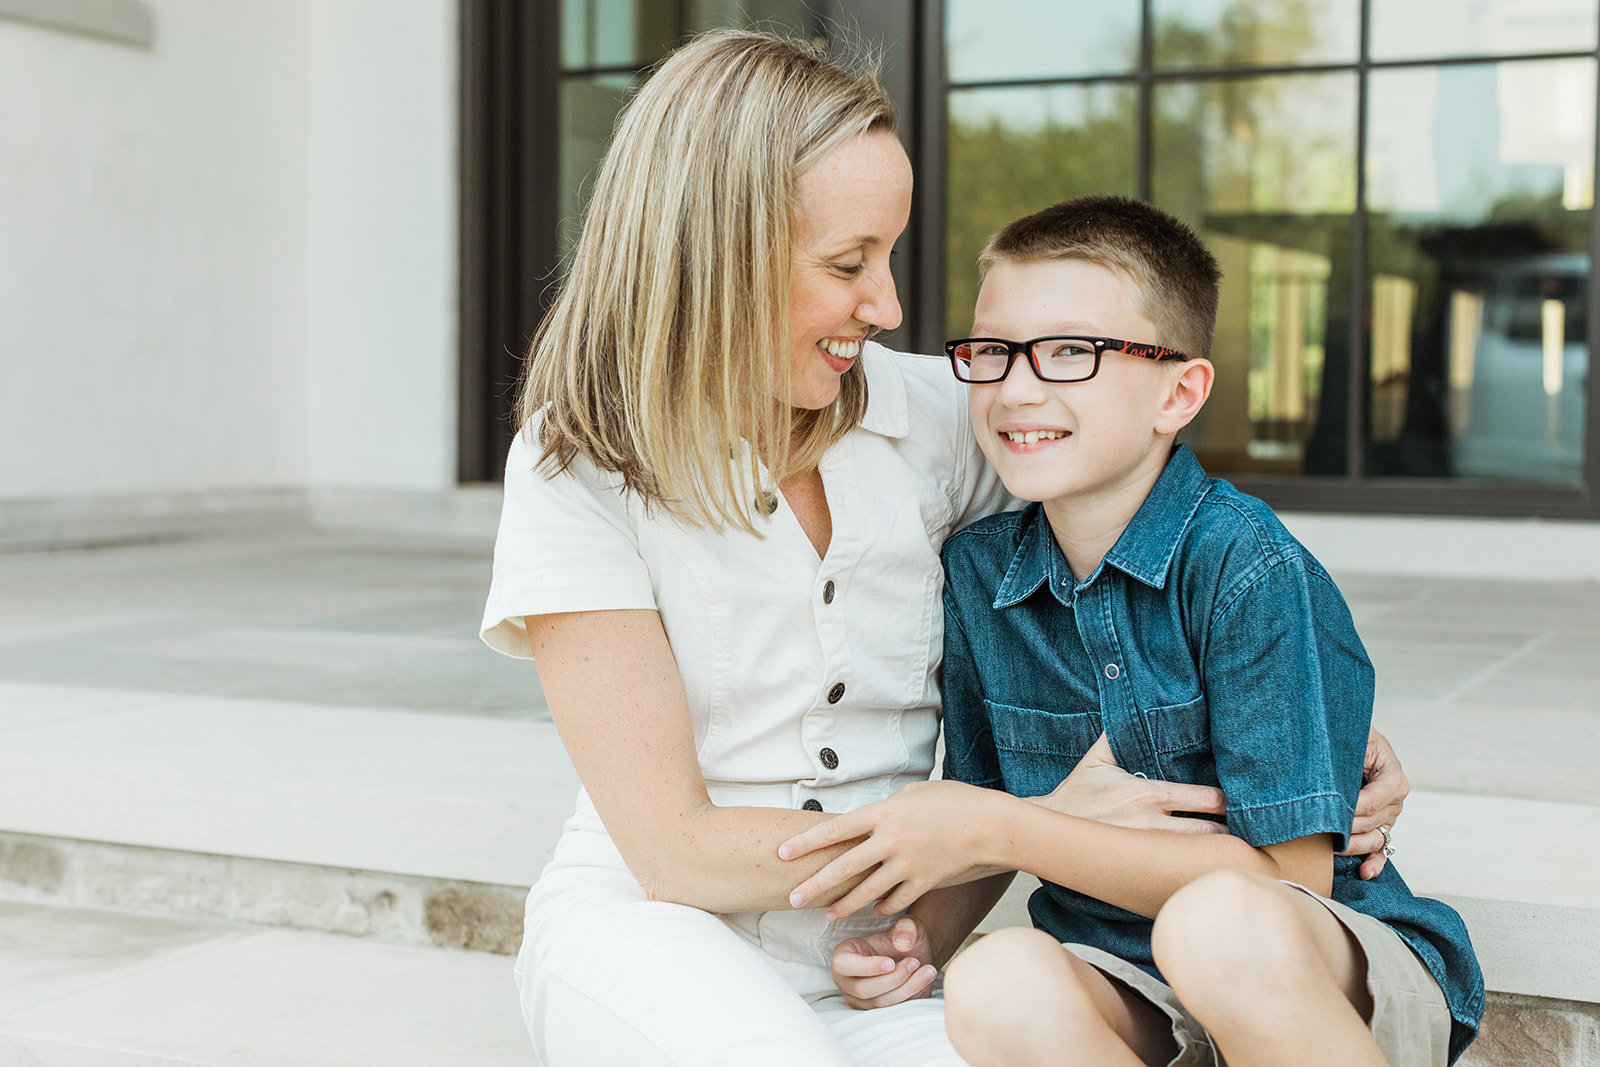 outdoor in-home family session in nashville tennessee. mom and son